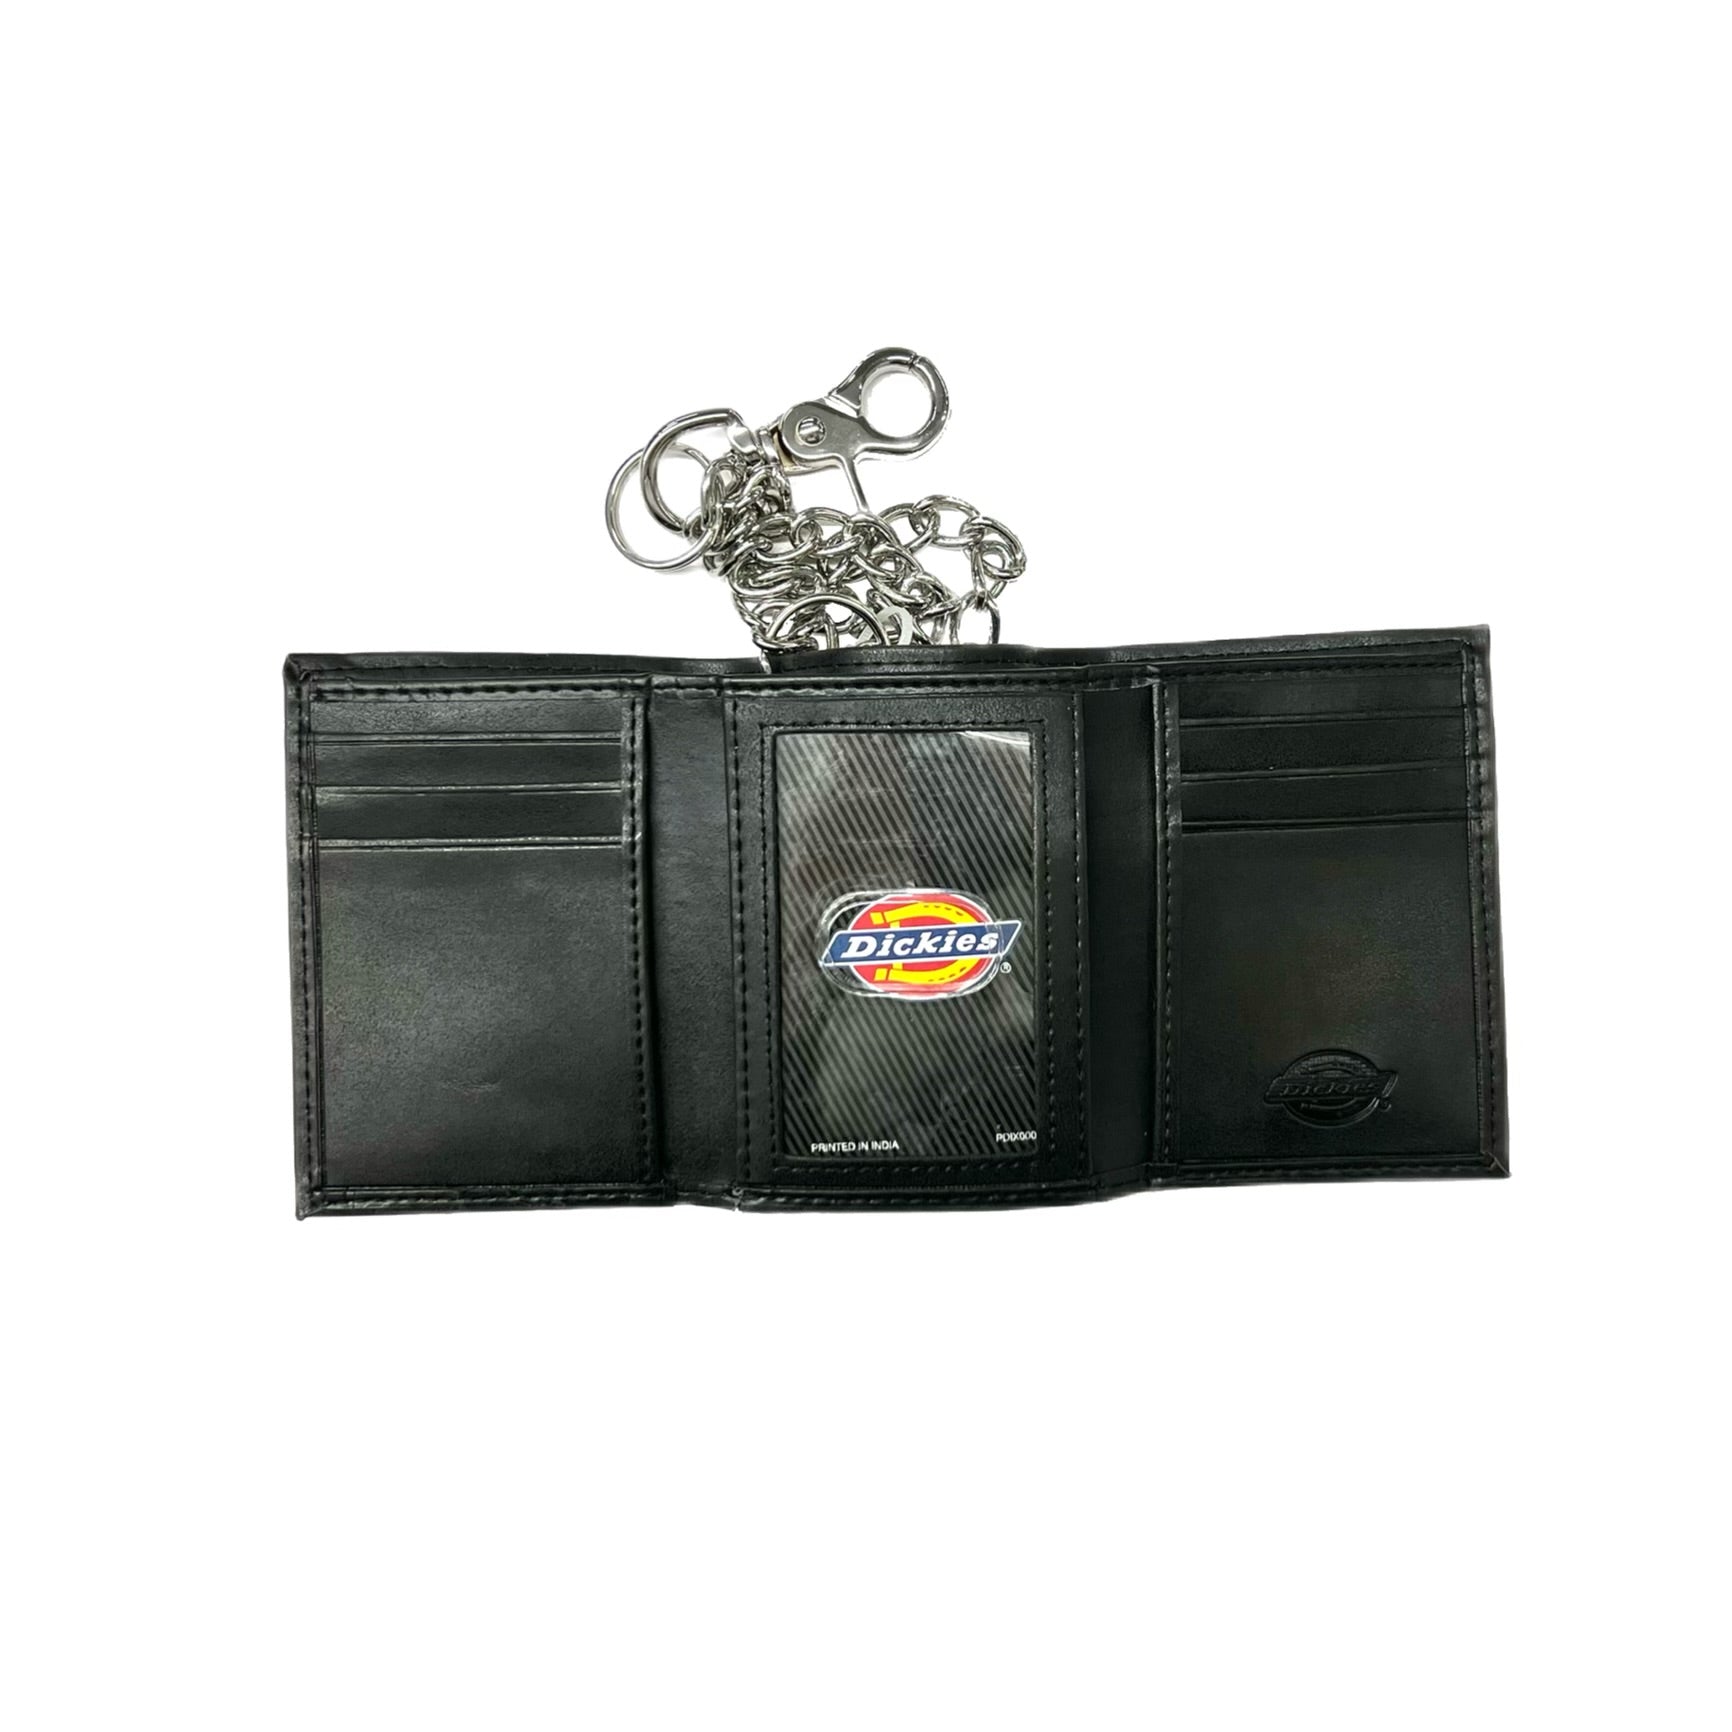 Dickies Chain Trifold Wallet